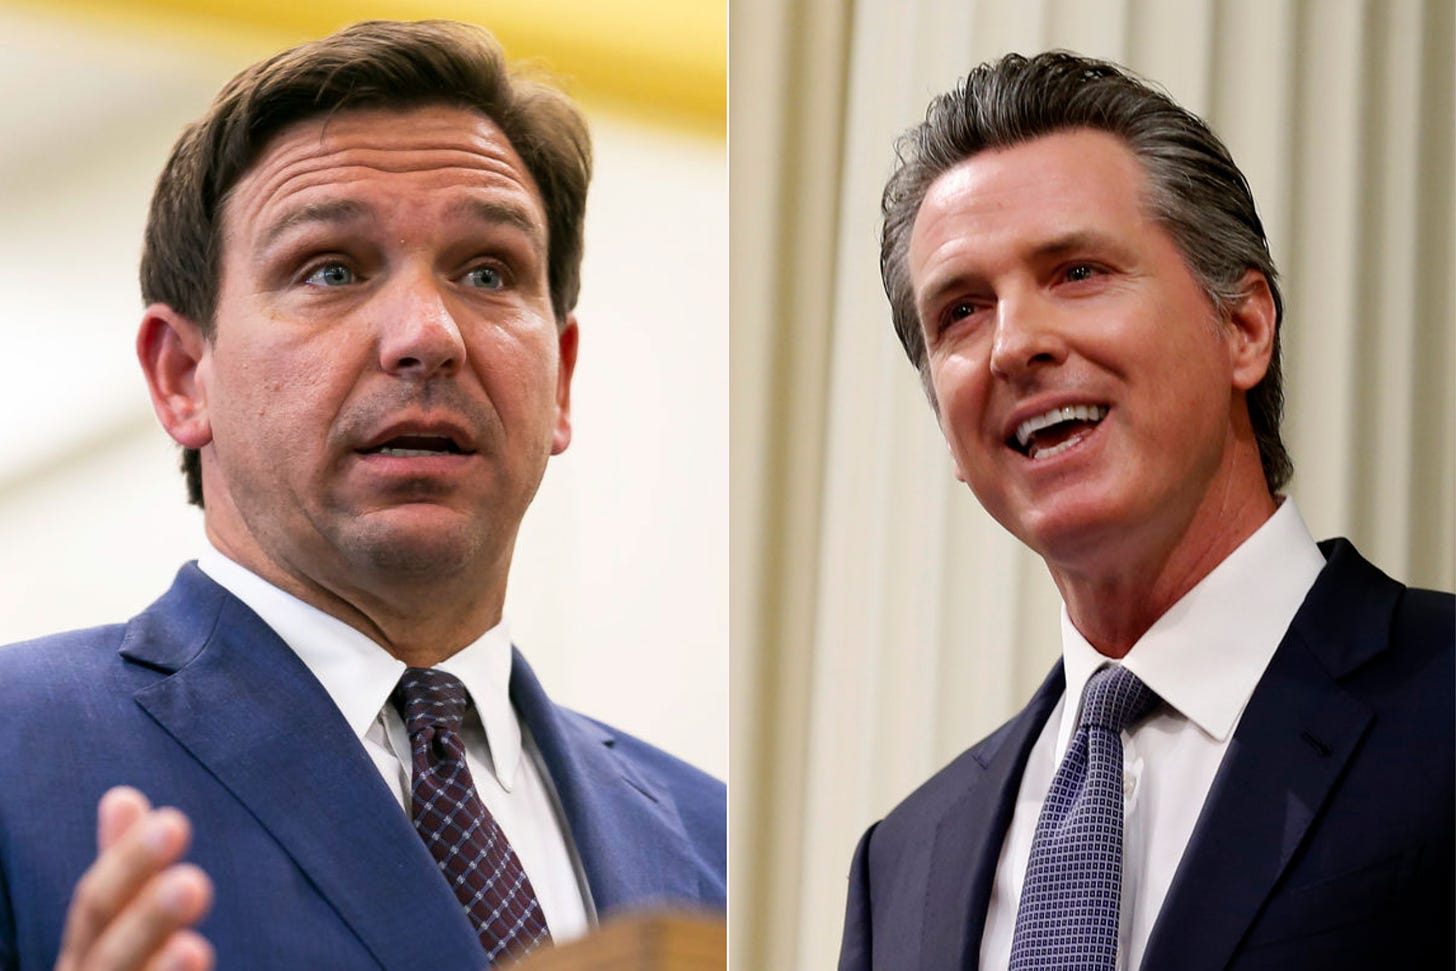 California Gov. Newsom Says 'Door is Open' for Disney to Bring Jobs Back  After Antagonistic Comments from Florida Gov. DeSantis - WDW News Today